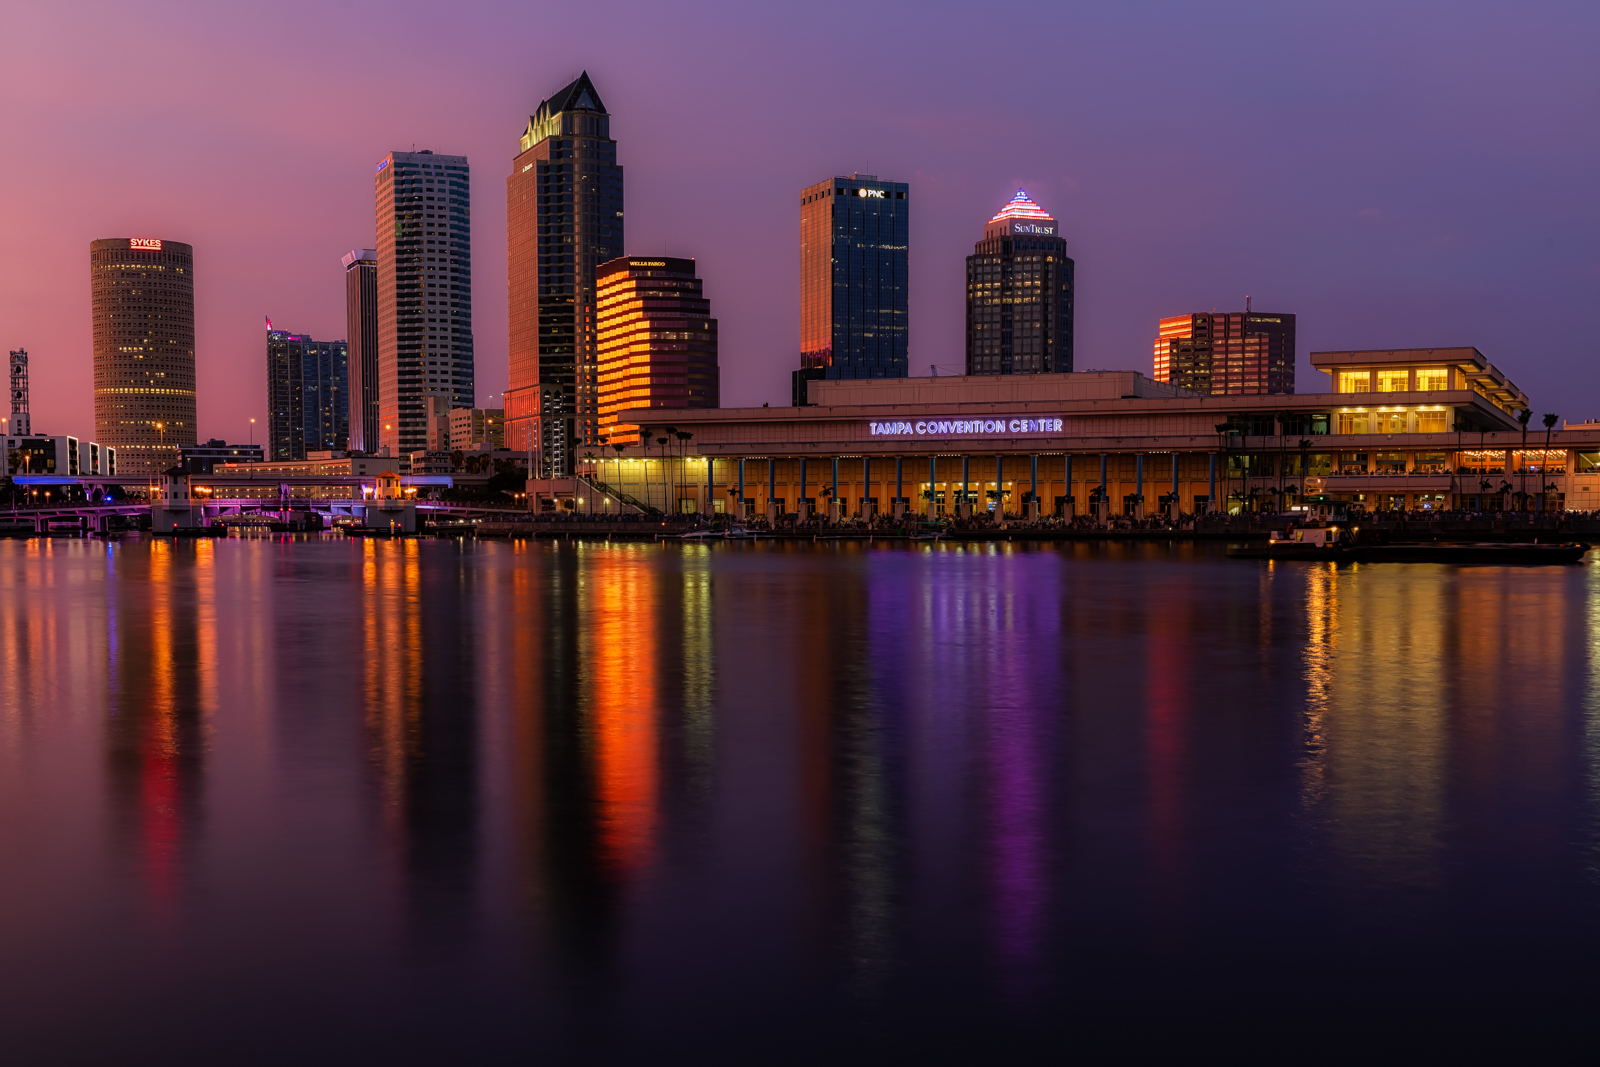 10 Best Things To Do in Tampa, Florida [with Suggested Tours]